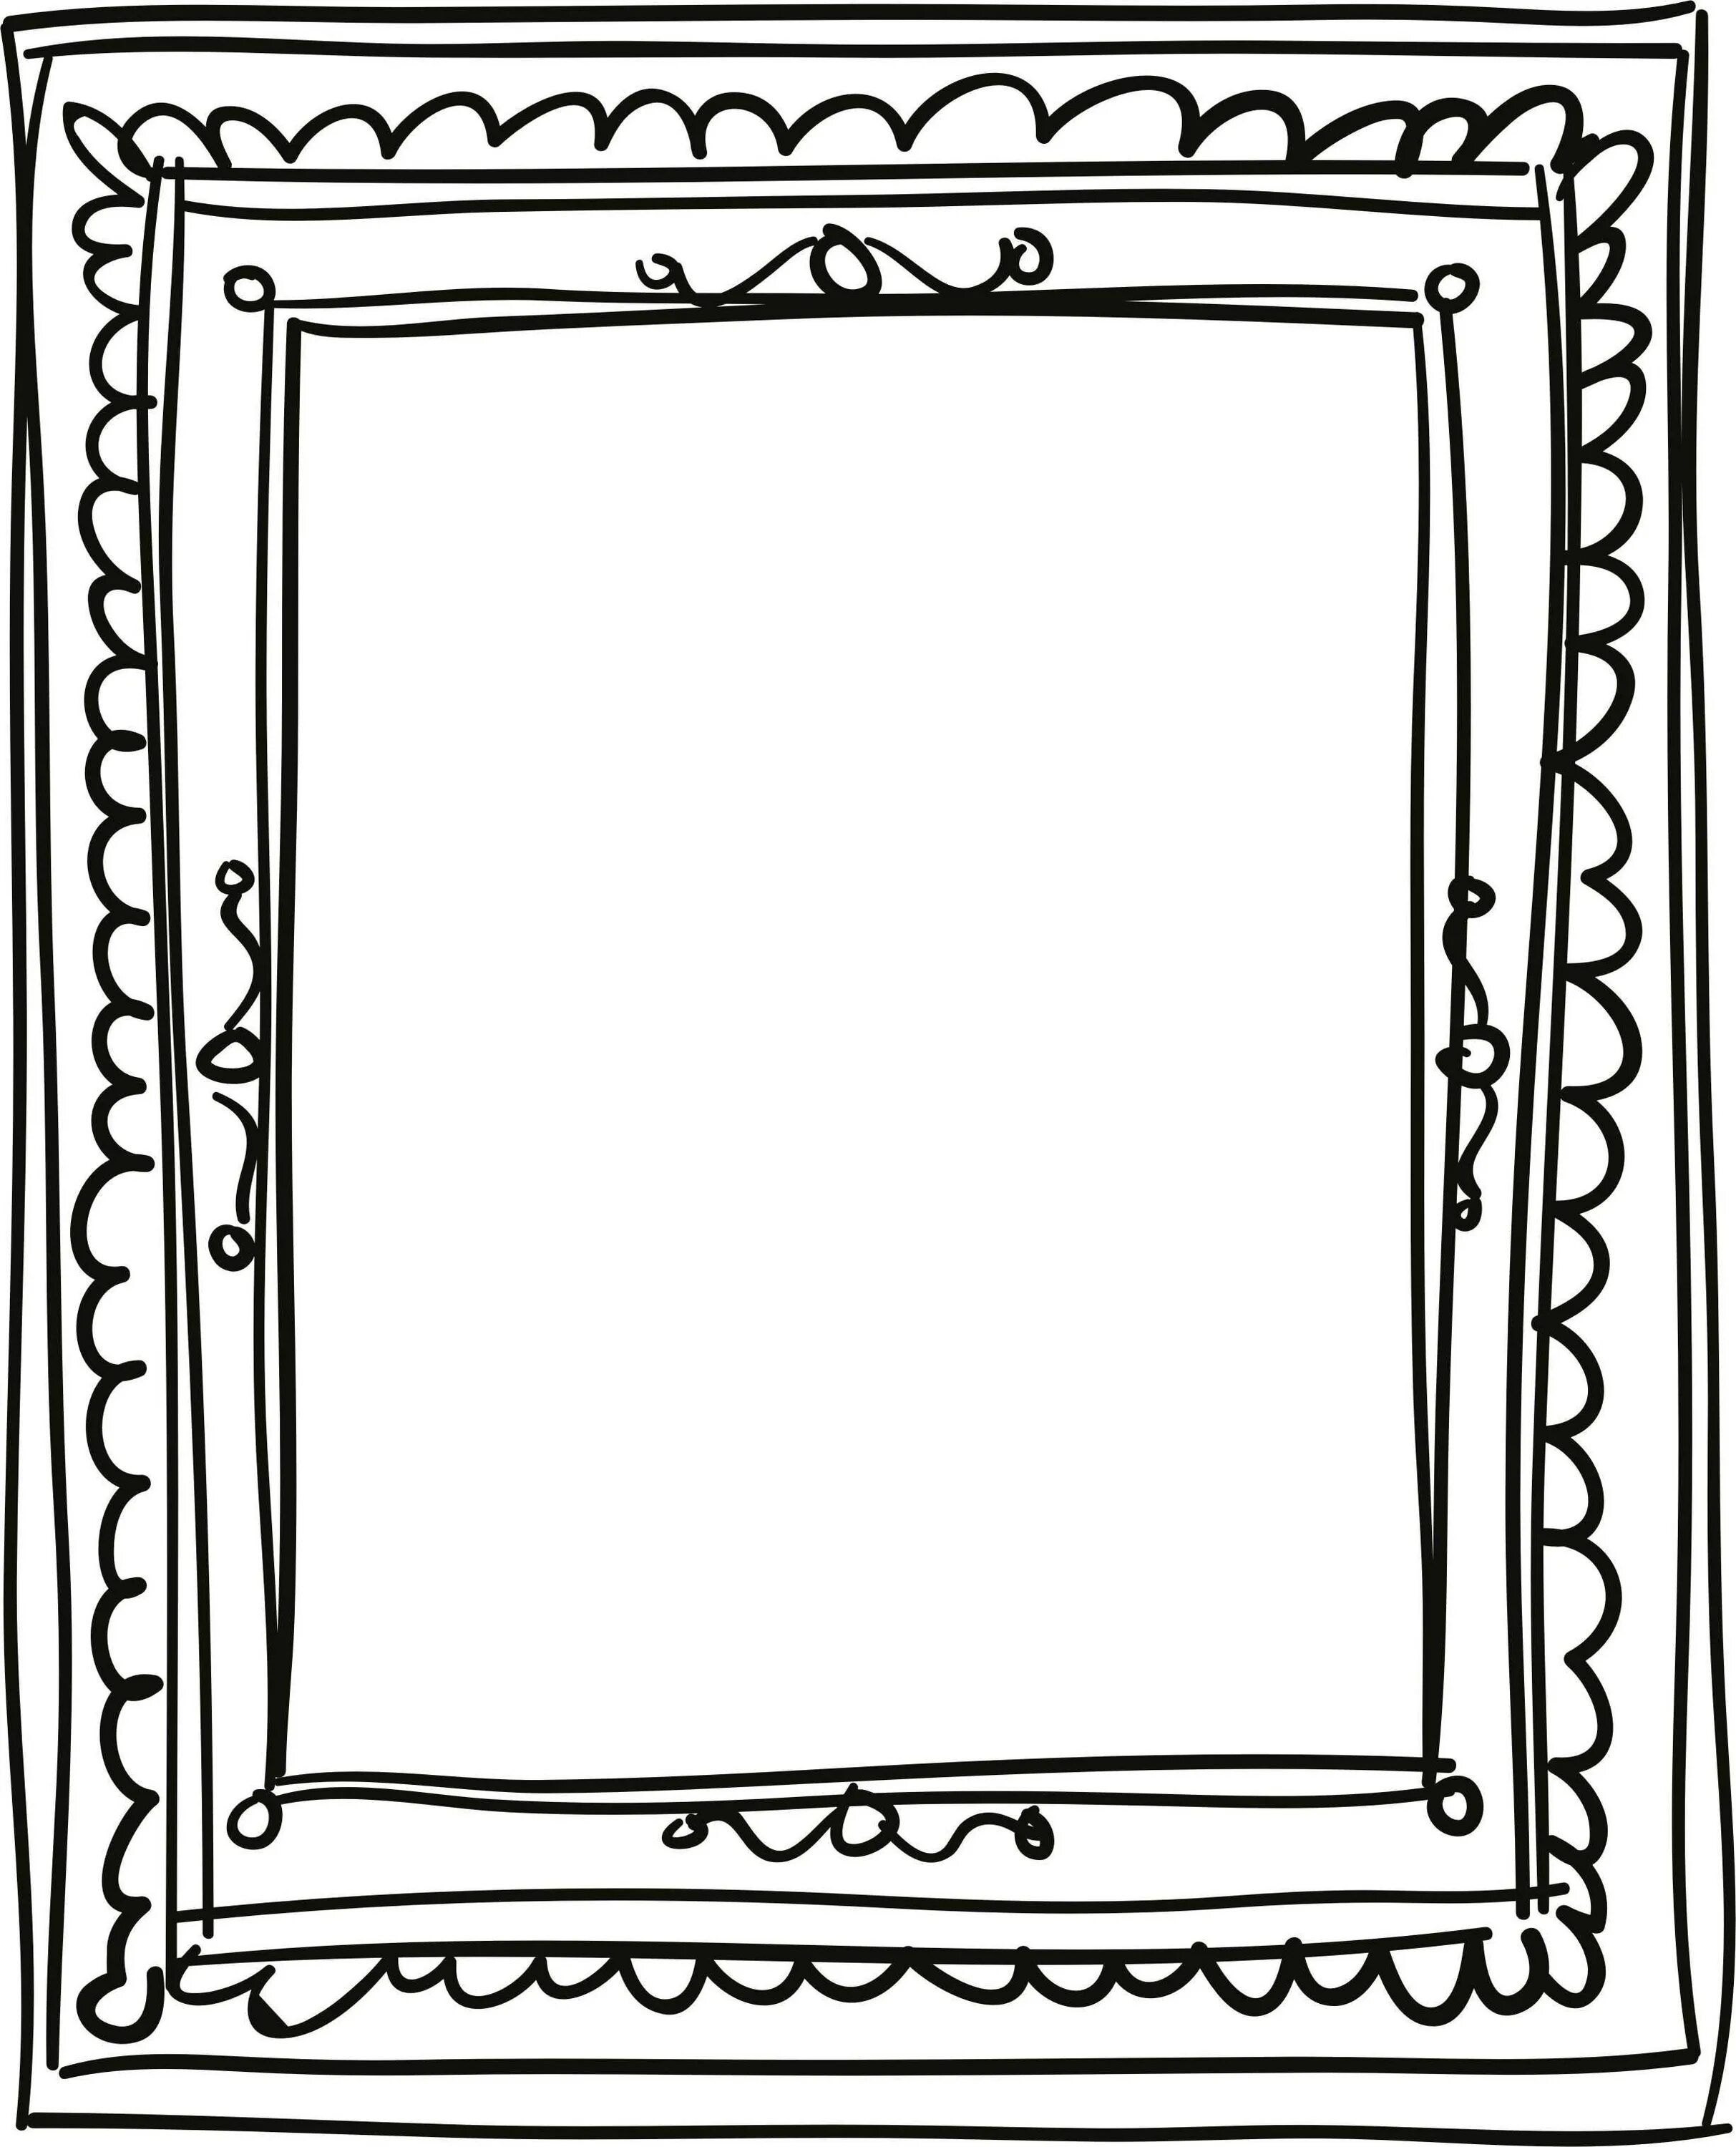 Intricate frame for coloring page